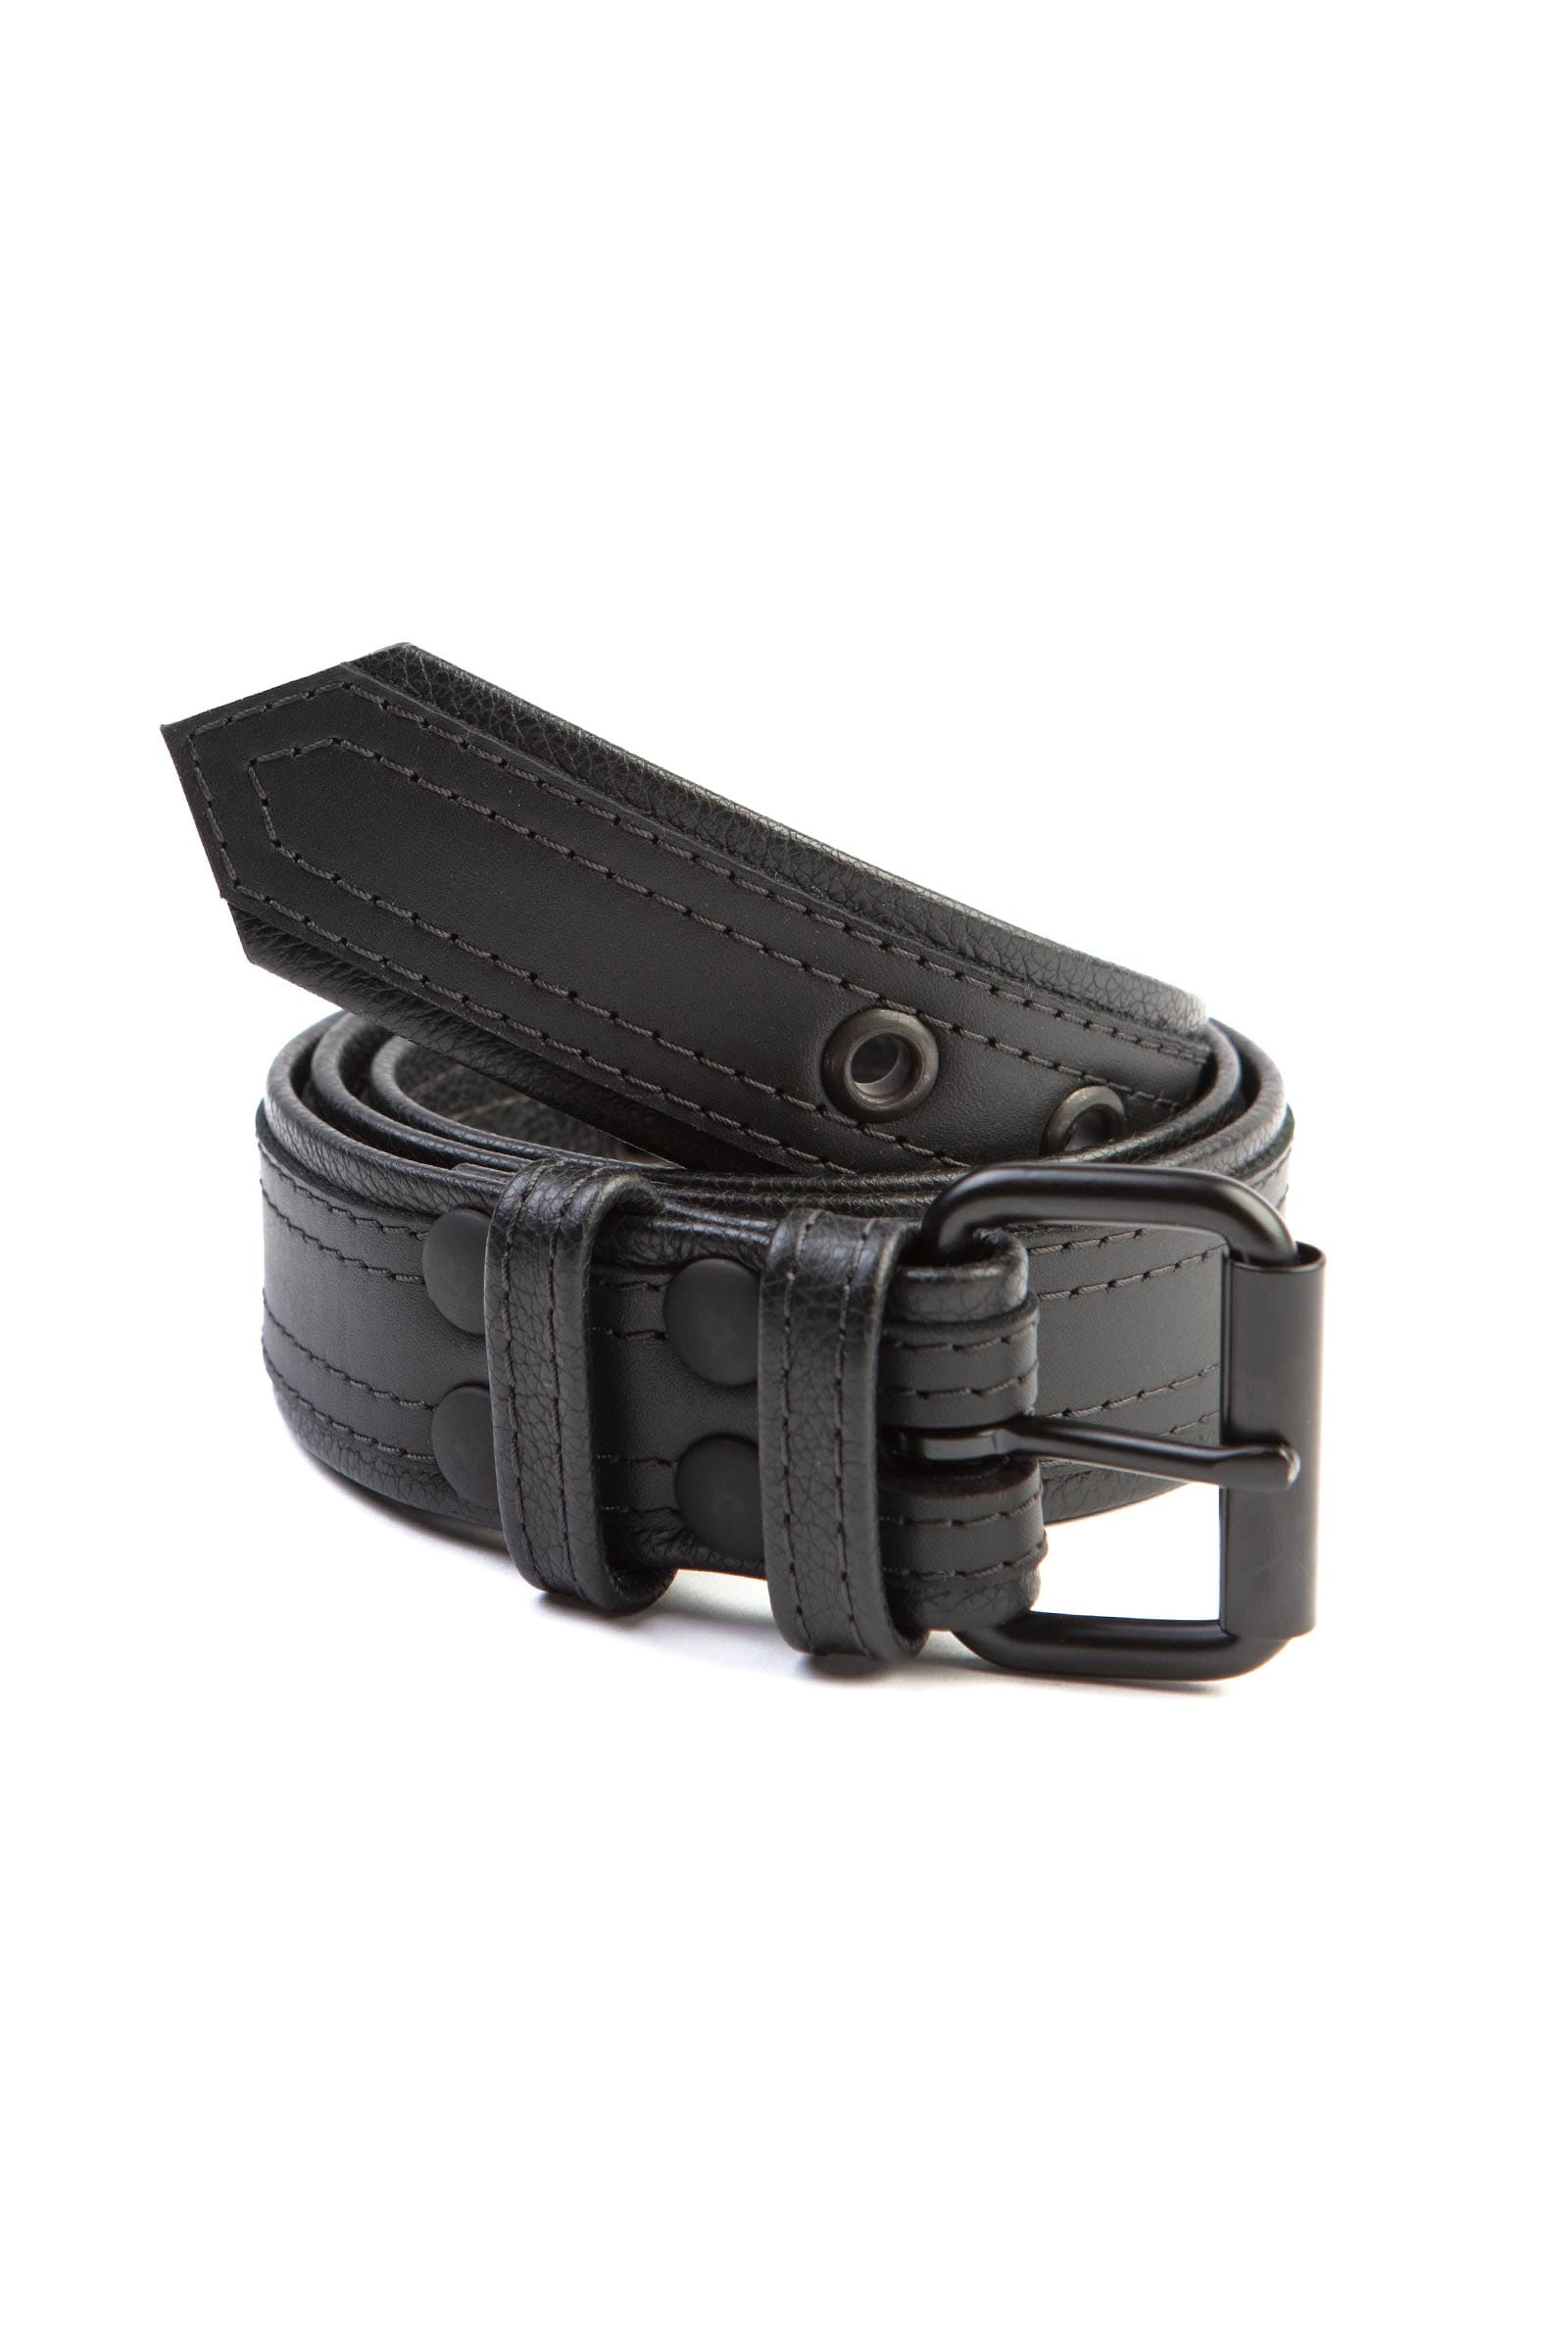 Combat Style All Black Leather Belt | Men's Accessories | ARMY OF MEN